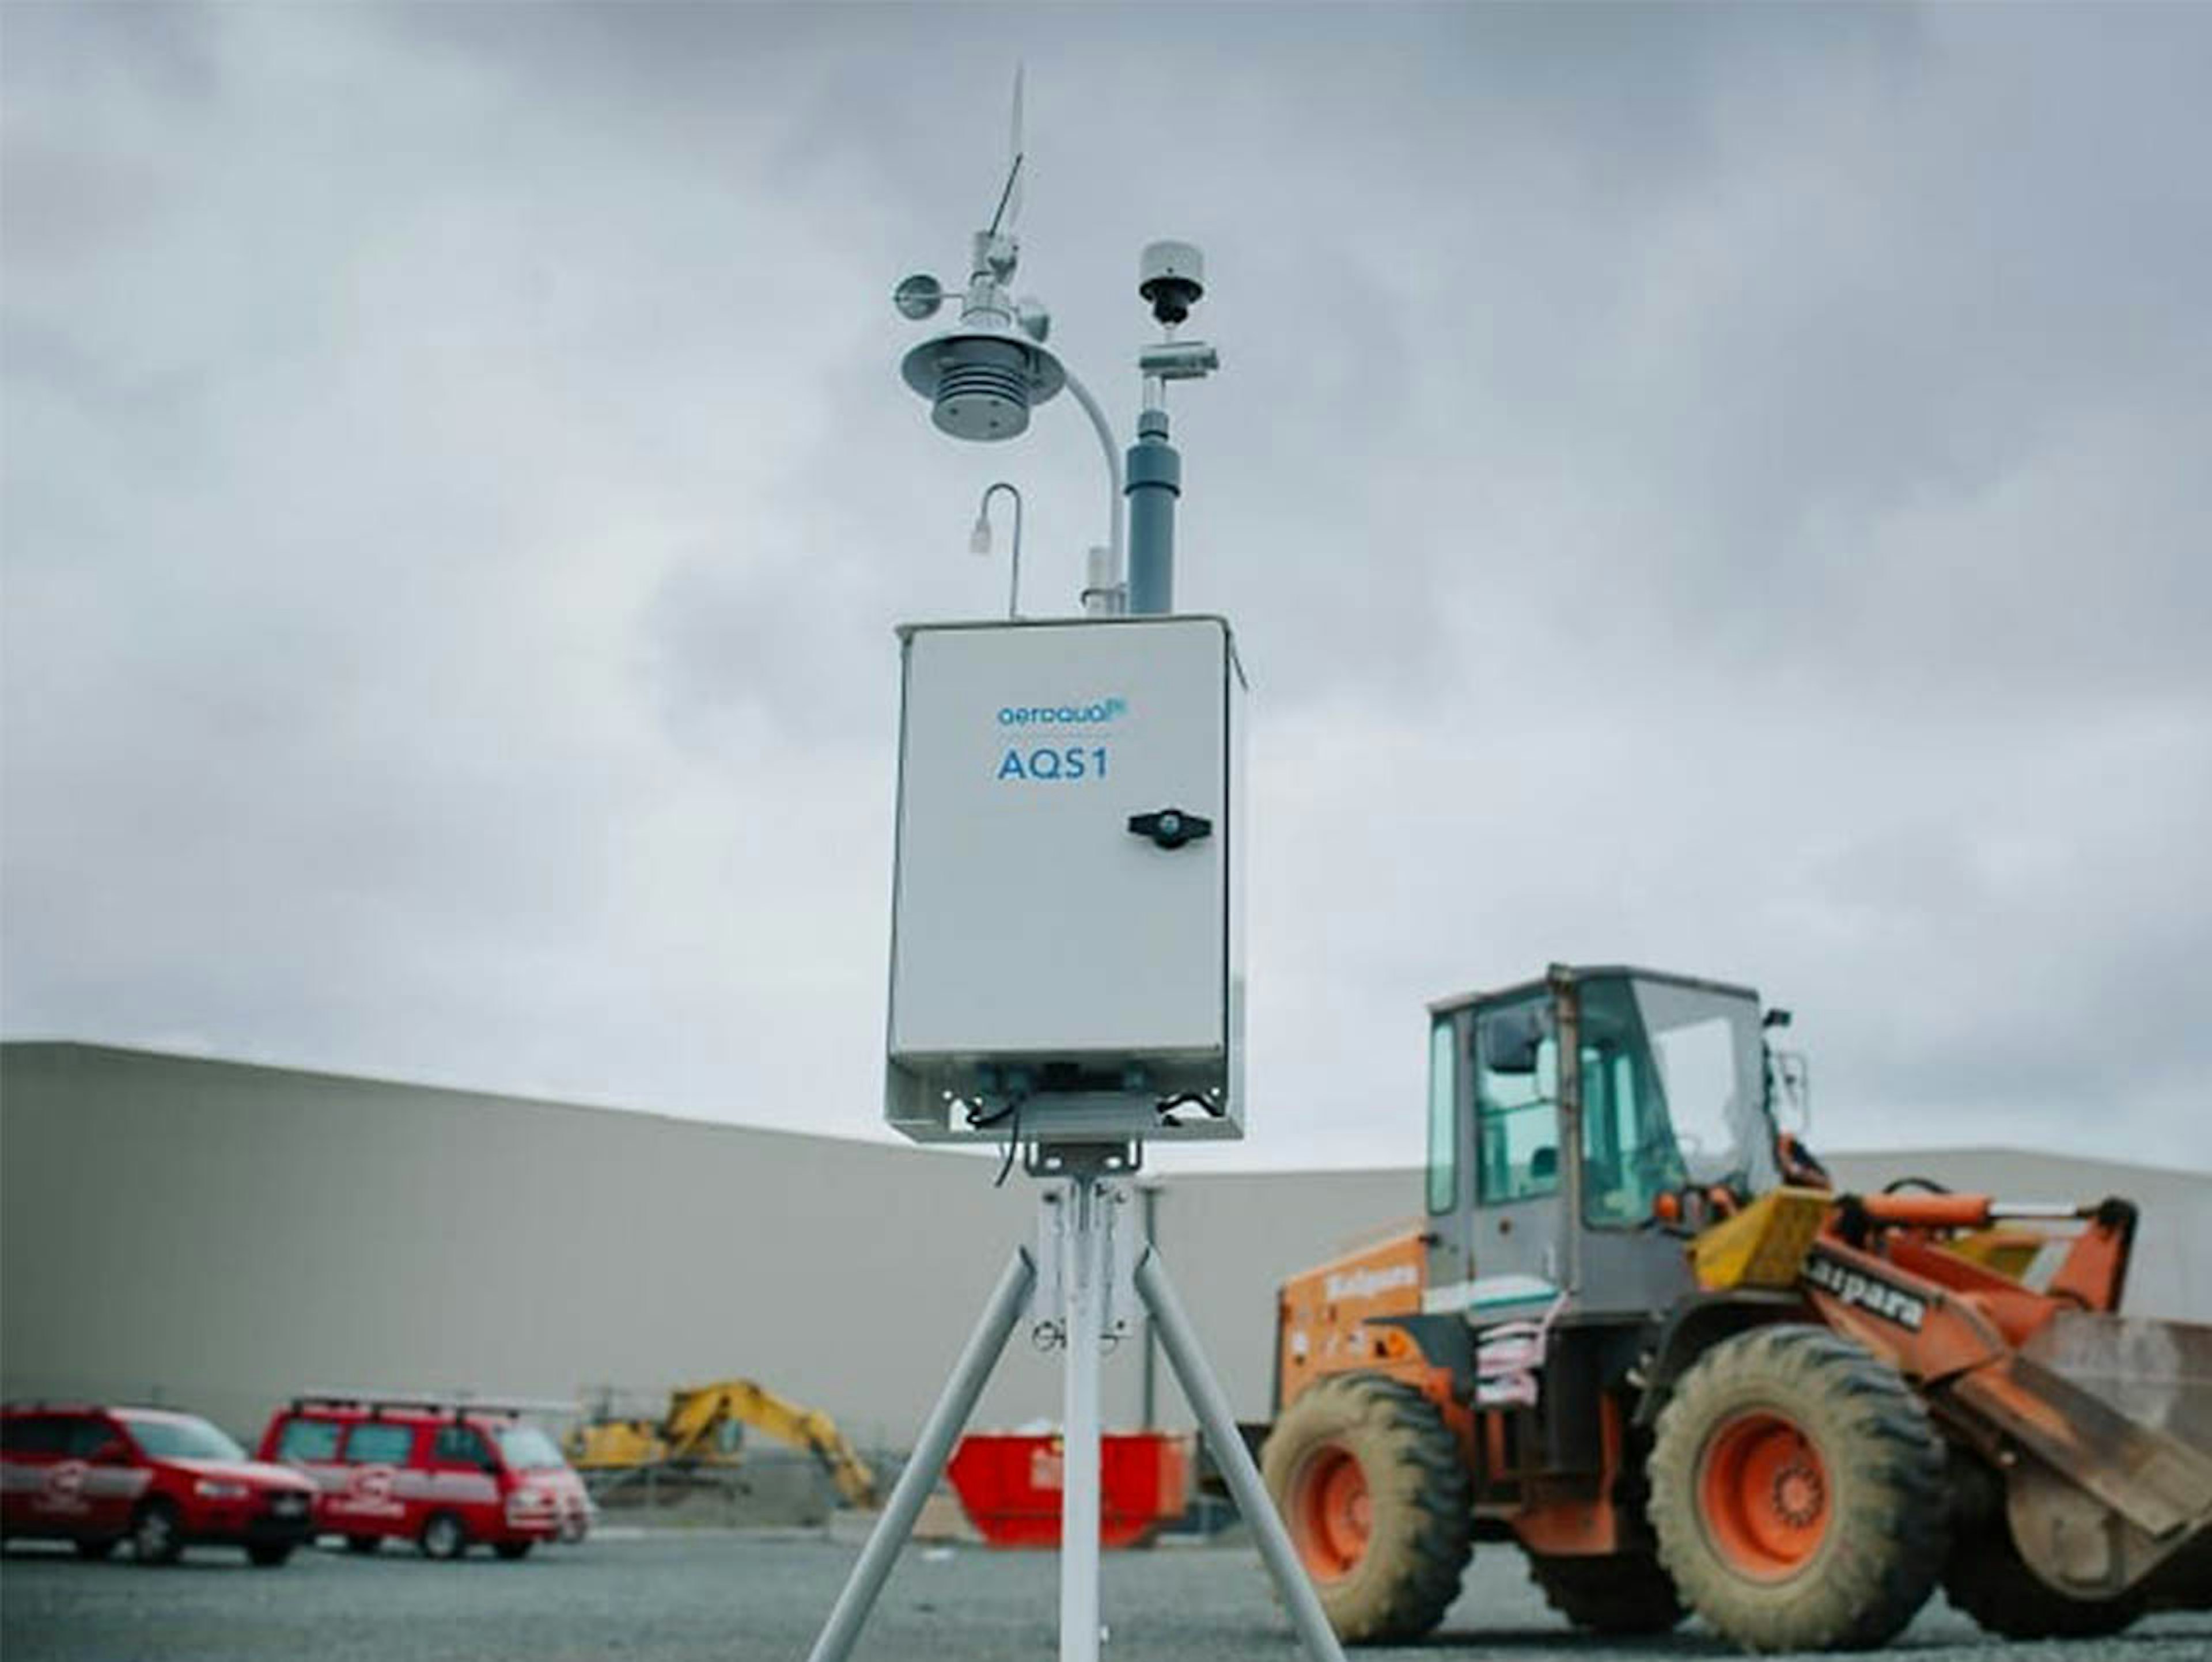 All-in-one systems like the AQS 1 Air Quality Monitor integrate PM10, TVOC and weather data with Wi-Fi and Cloud telemetry